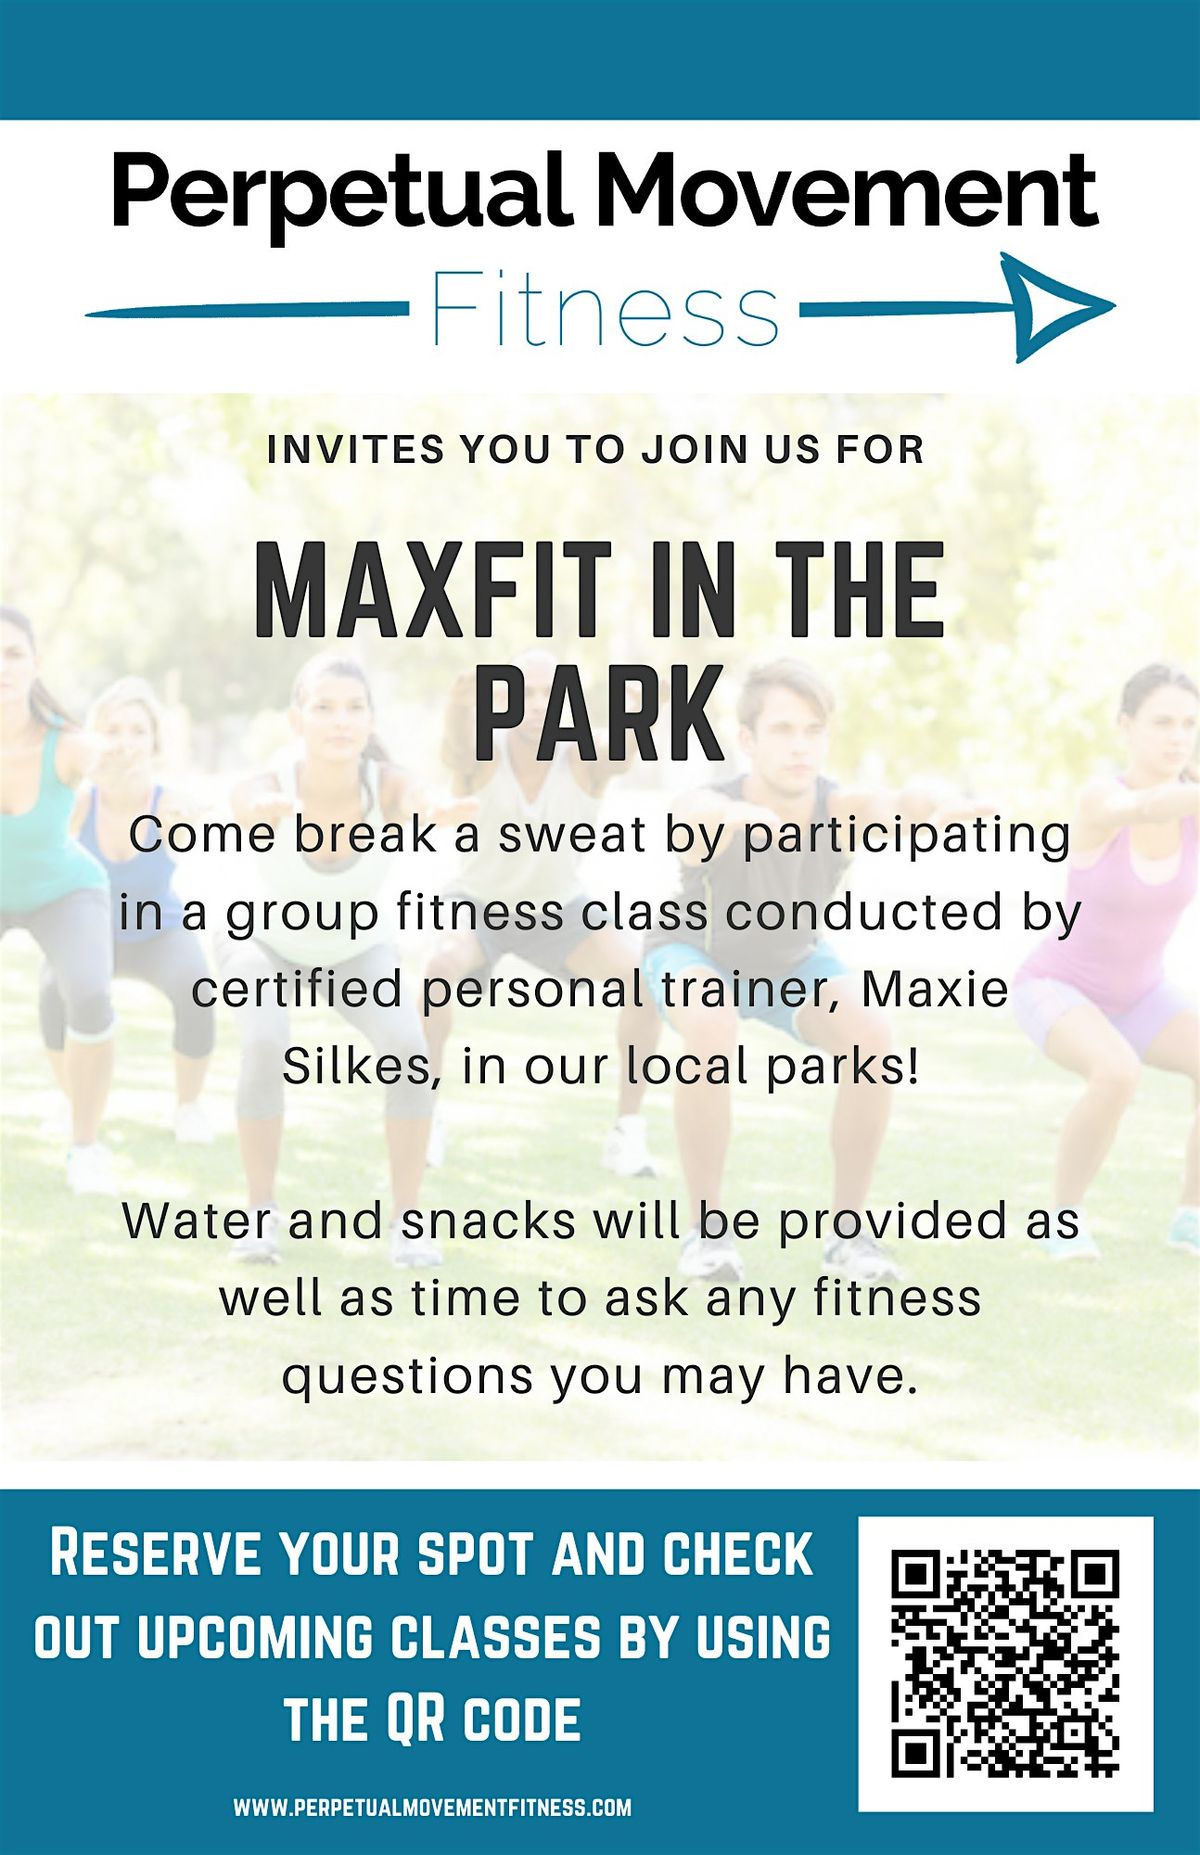 MaxFit in the Park